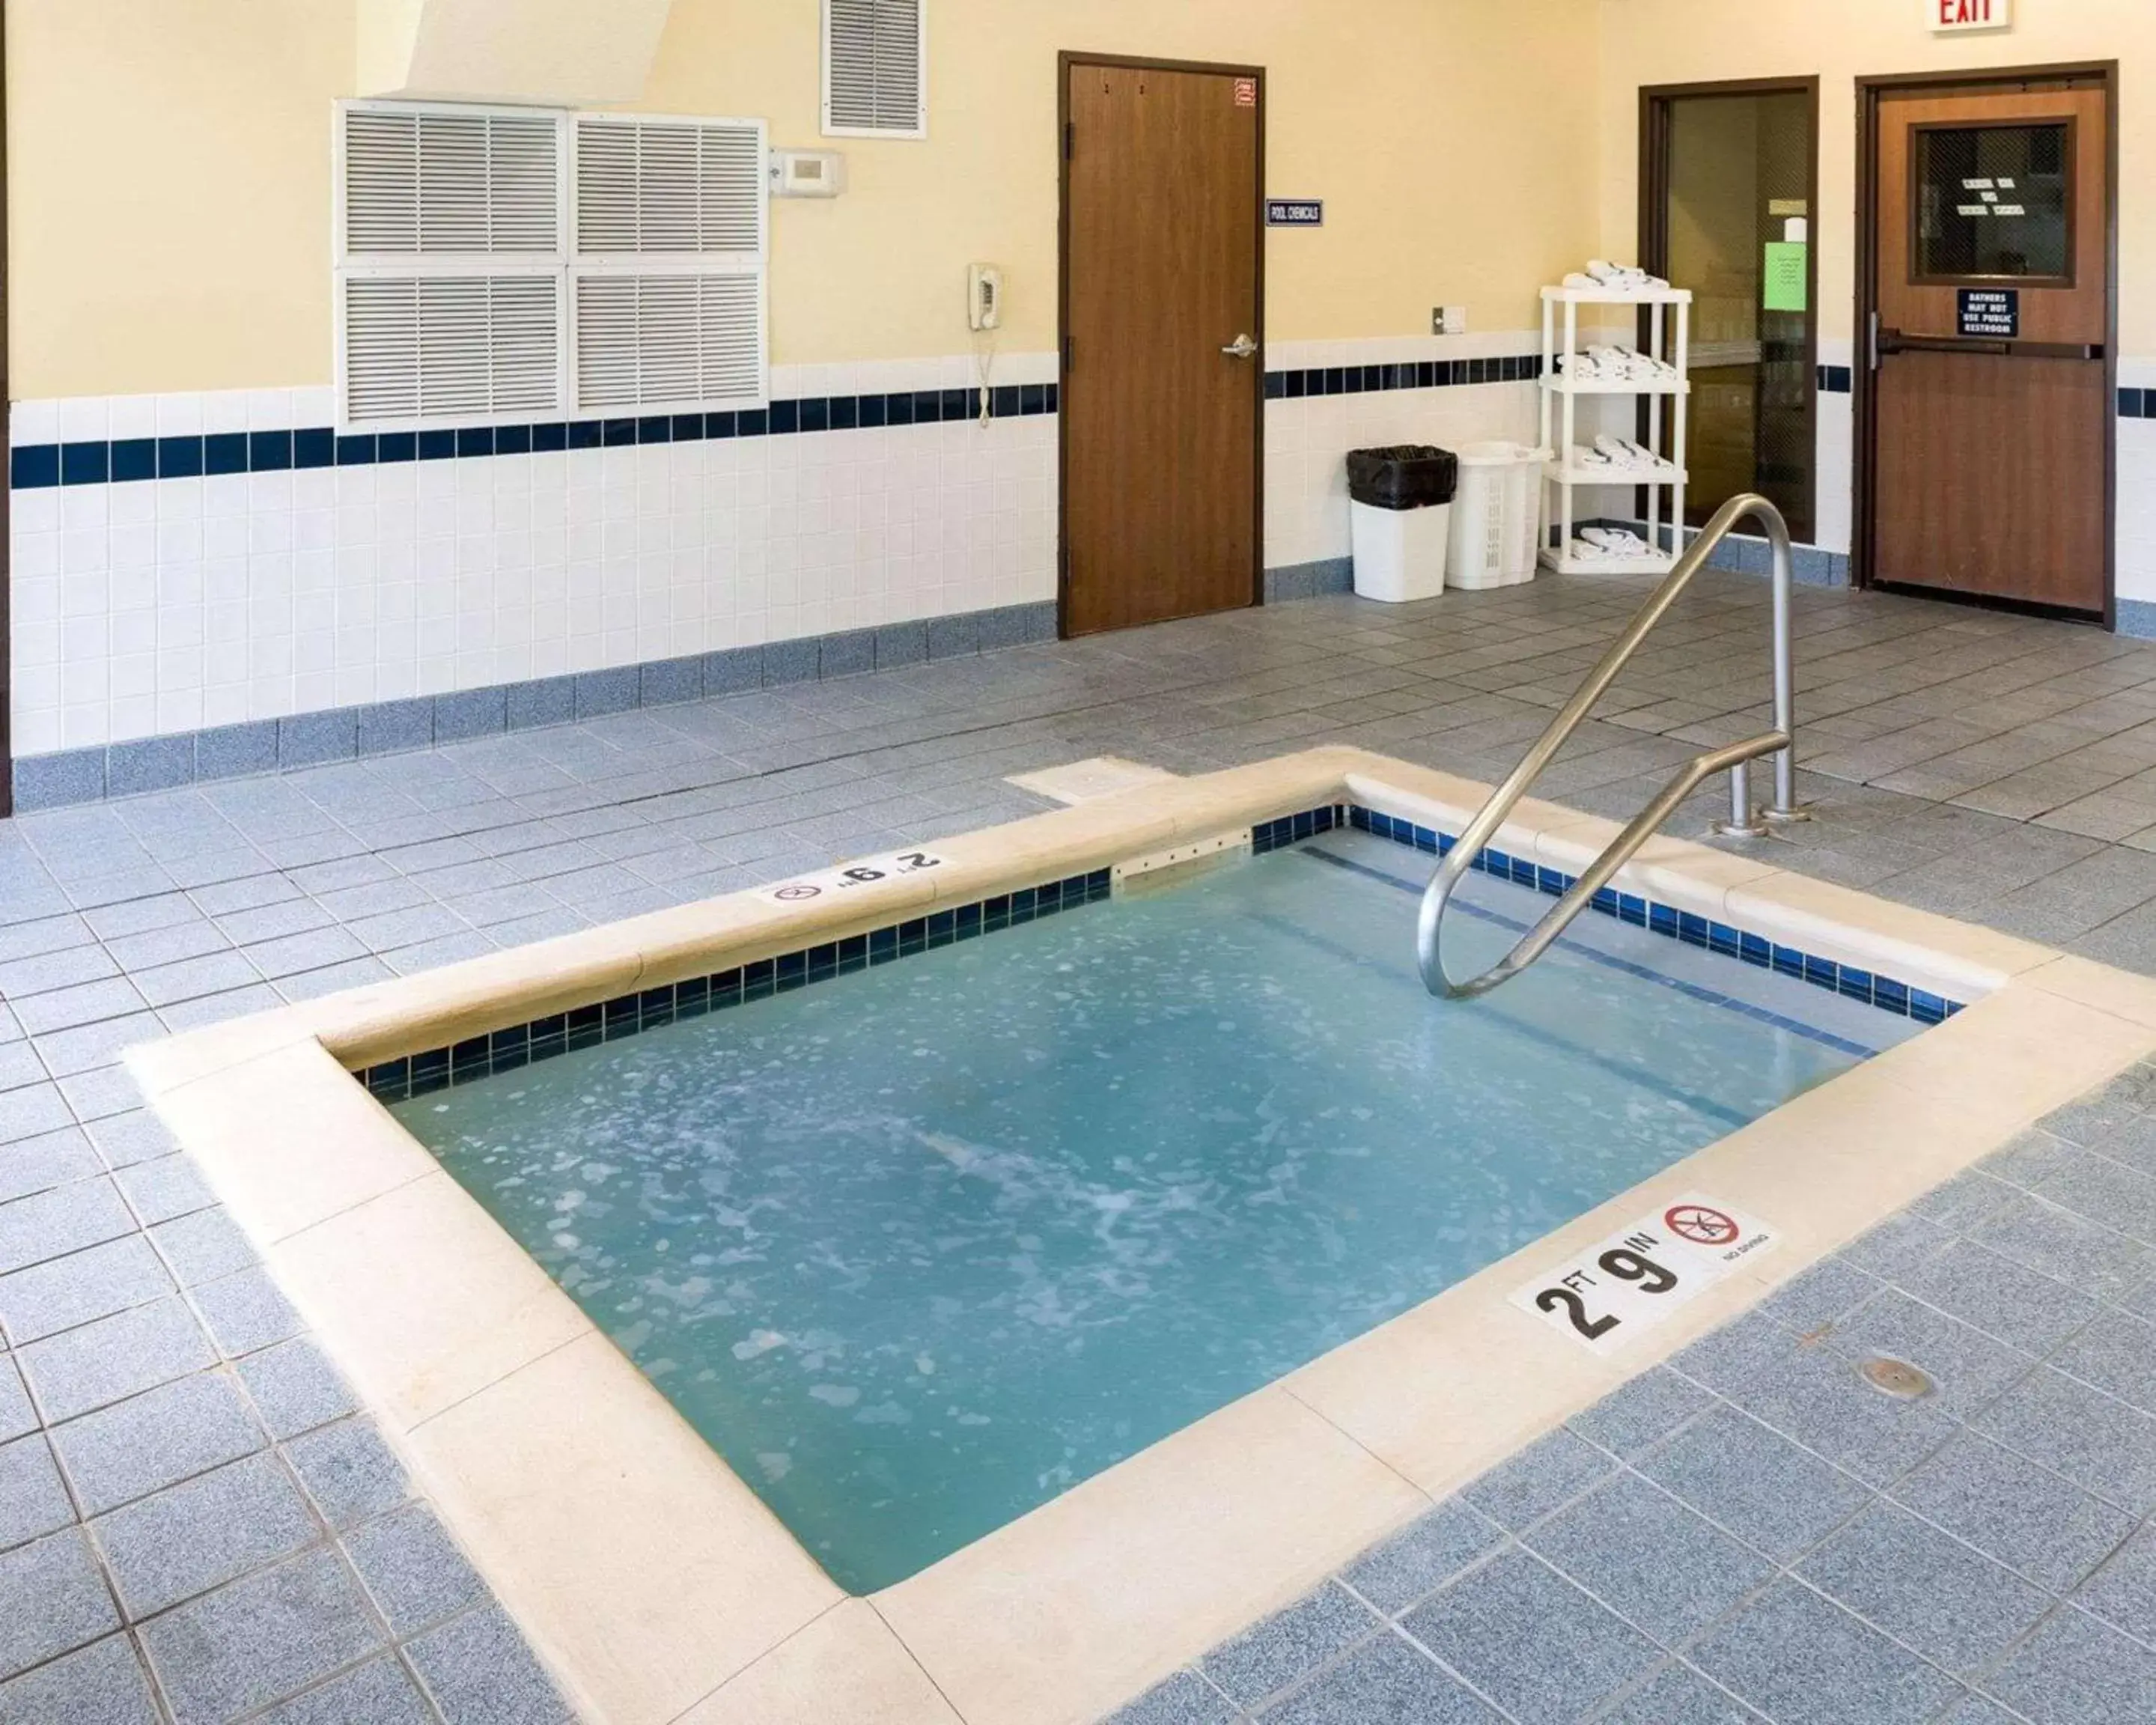 On site, Swimming Pool in Quality Inn Lakeville